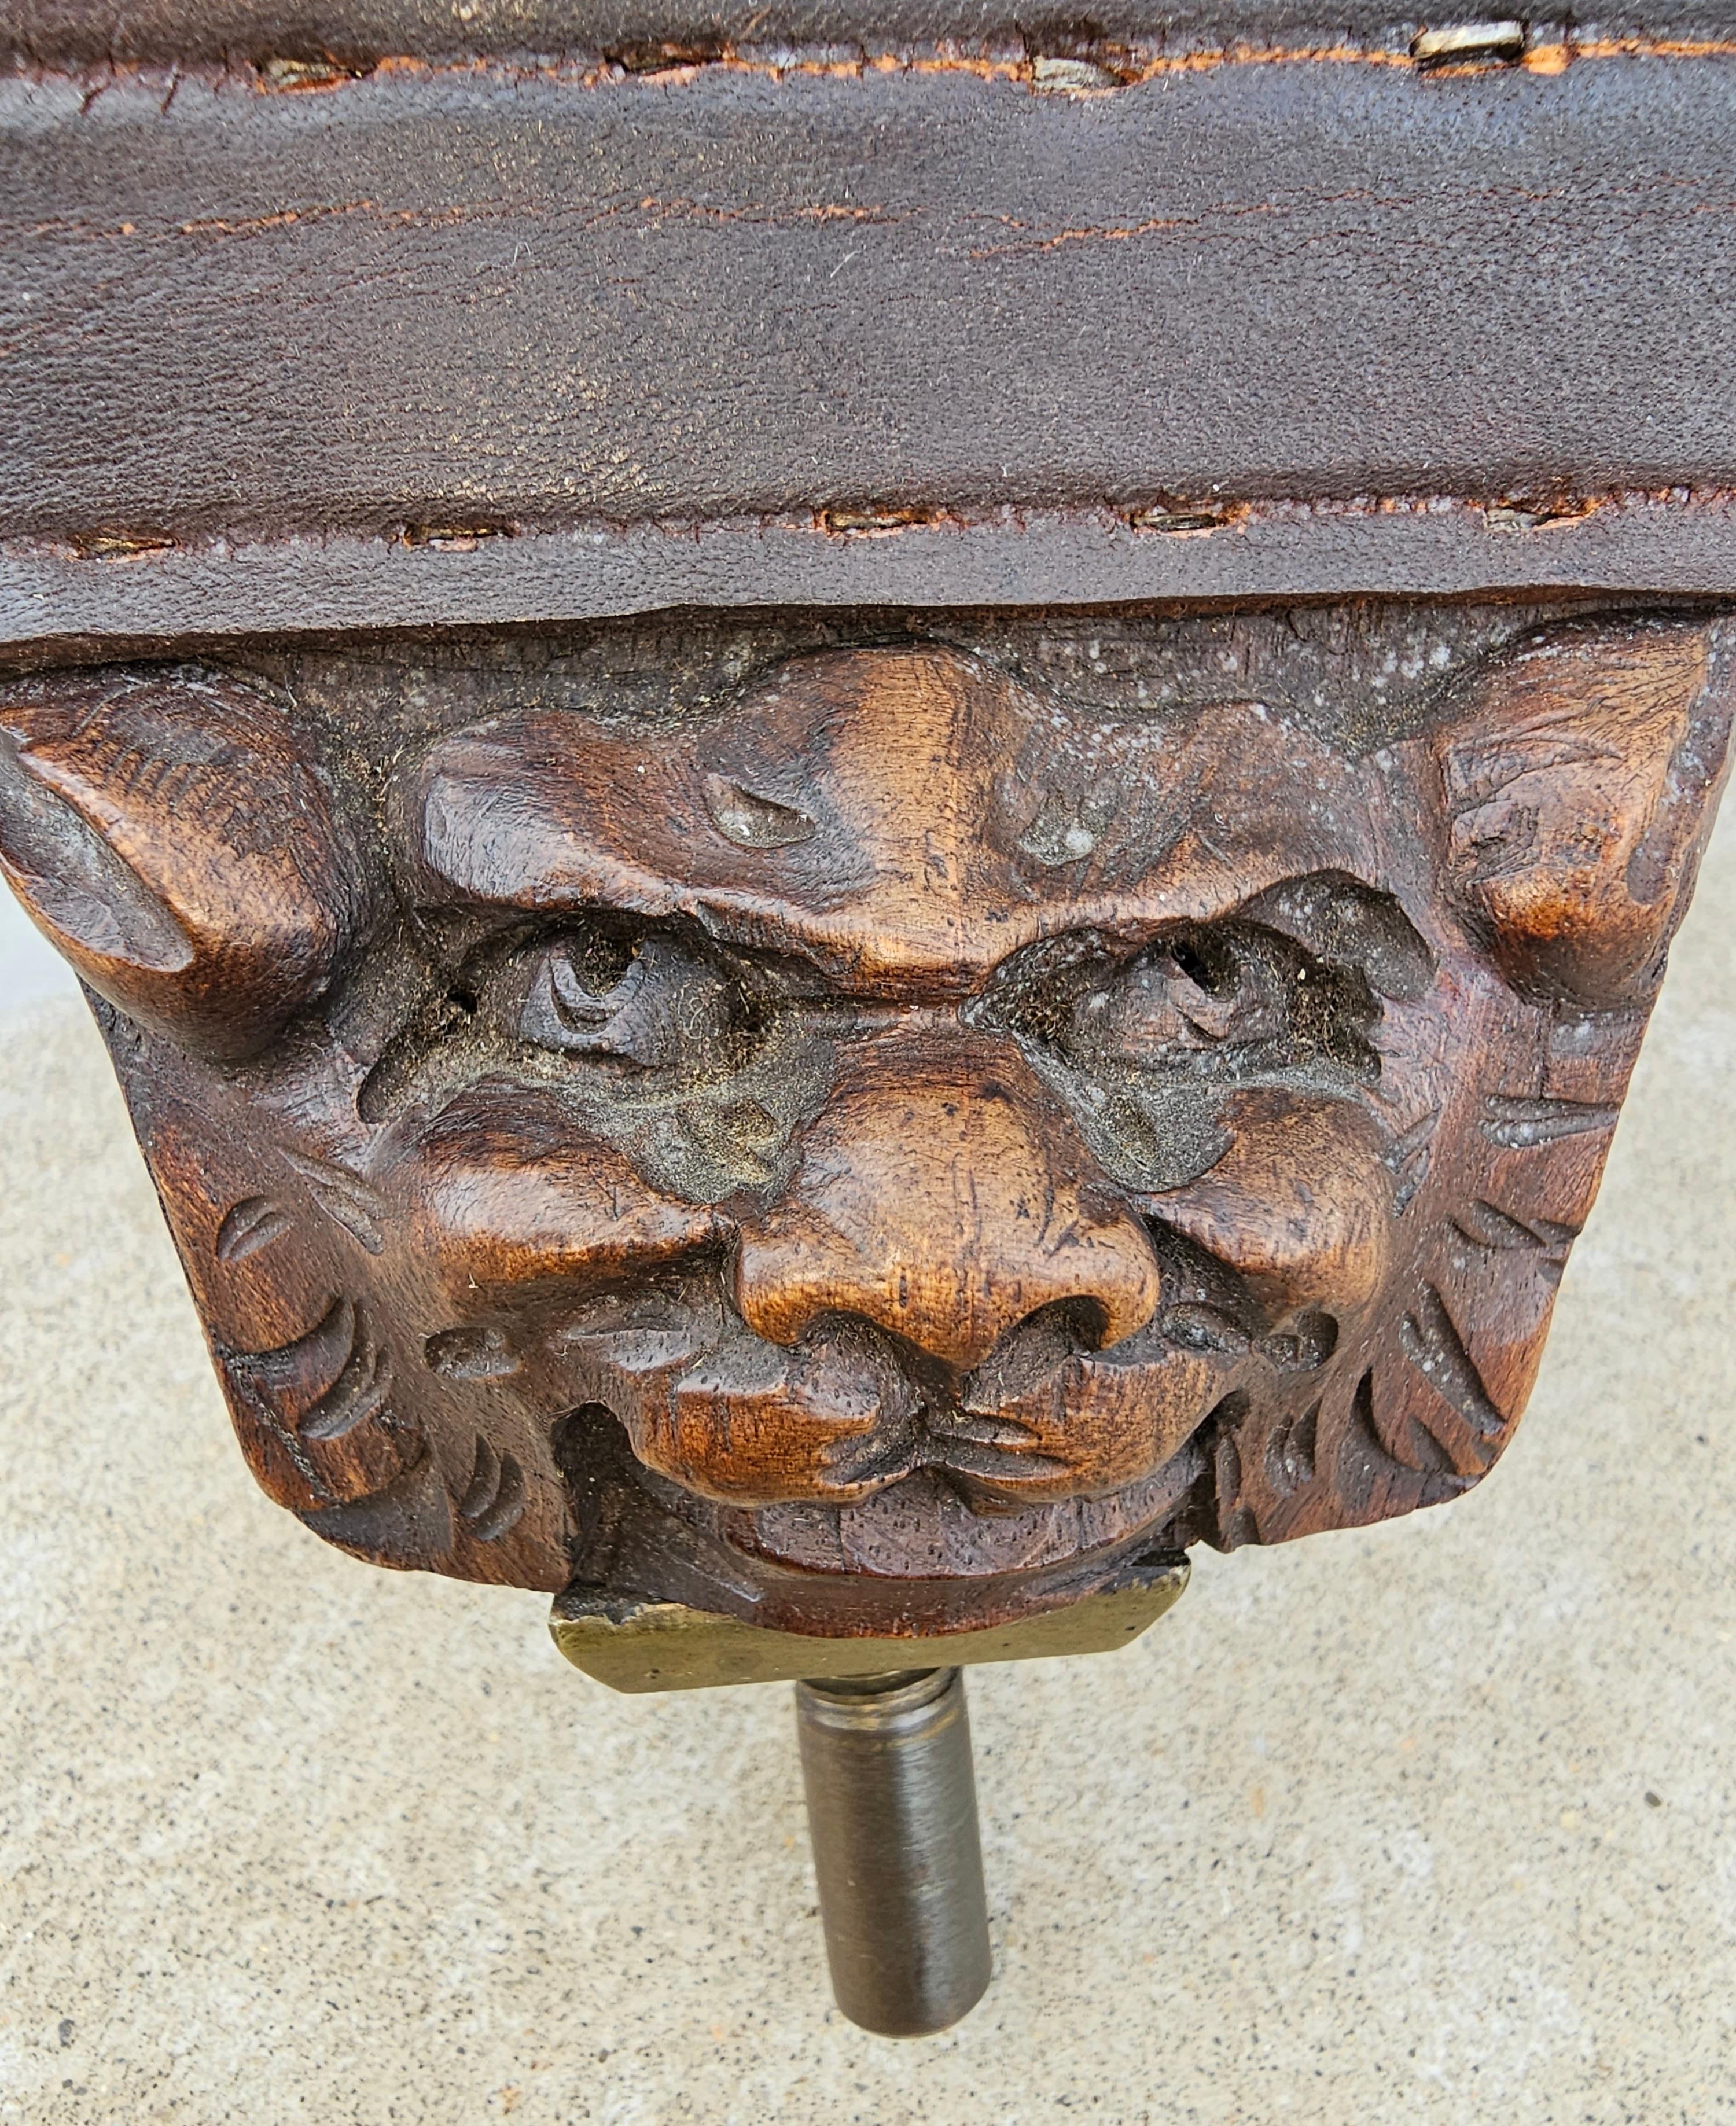 A 19th century Intricately carved Italian fire bellows decorated with winged gri ns, roaring lion head, human figure, three cherubs and coat of arms on the verso. Lined with a leather to expand the bellows to fan a fire. Studded with brass pointed